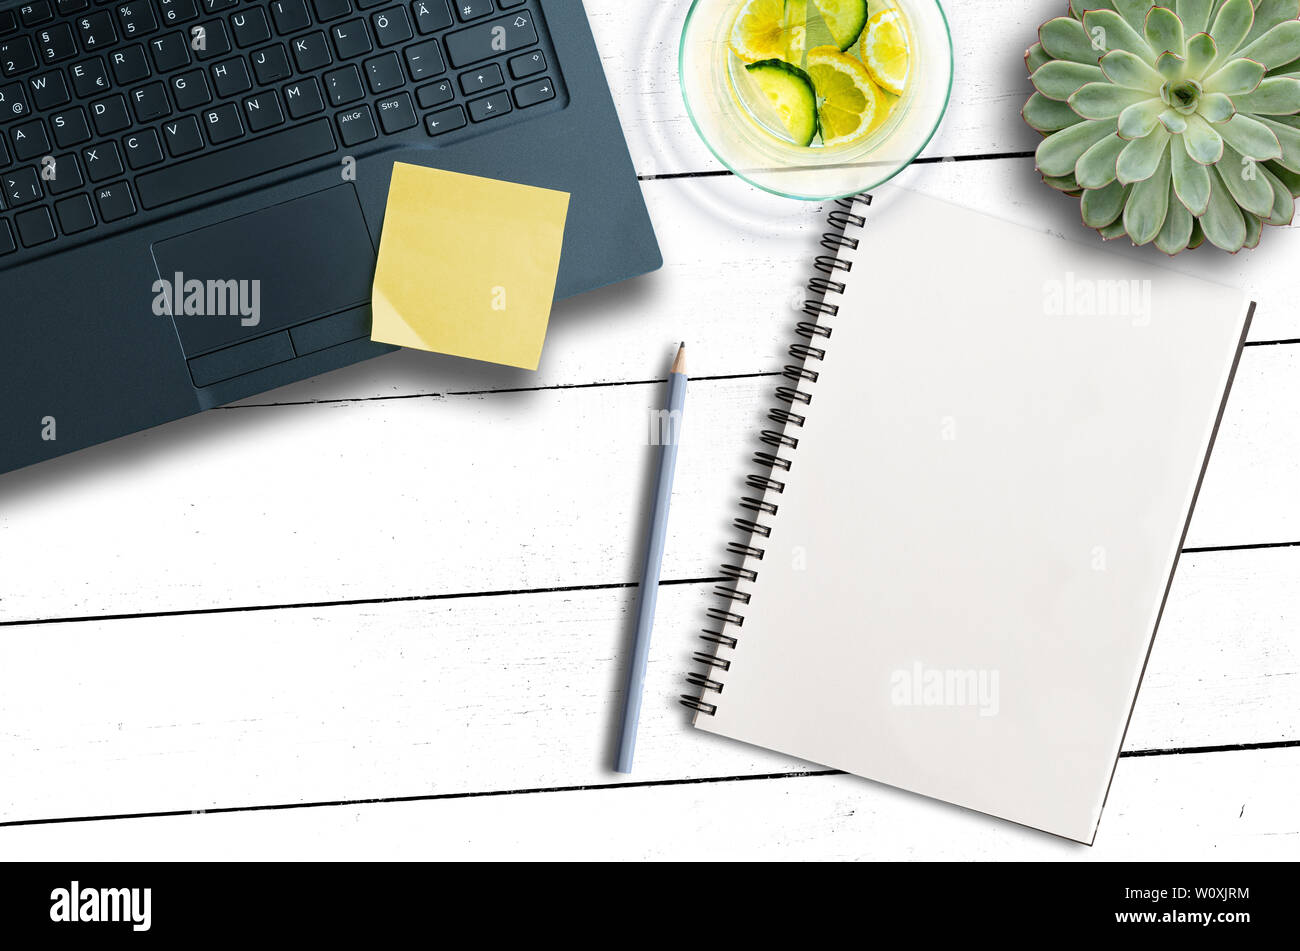 top view of office desk with laptop computer, notepad, pen and succulent plant Stock Photo